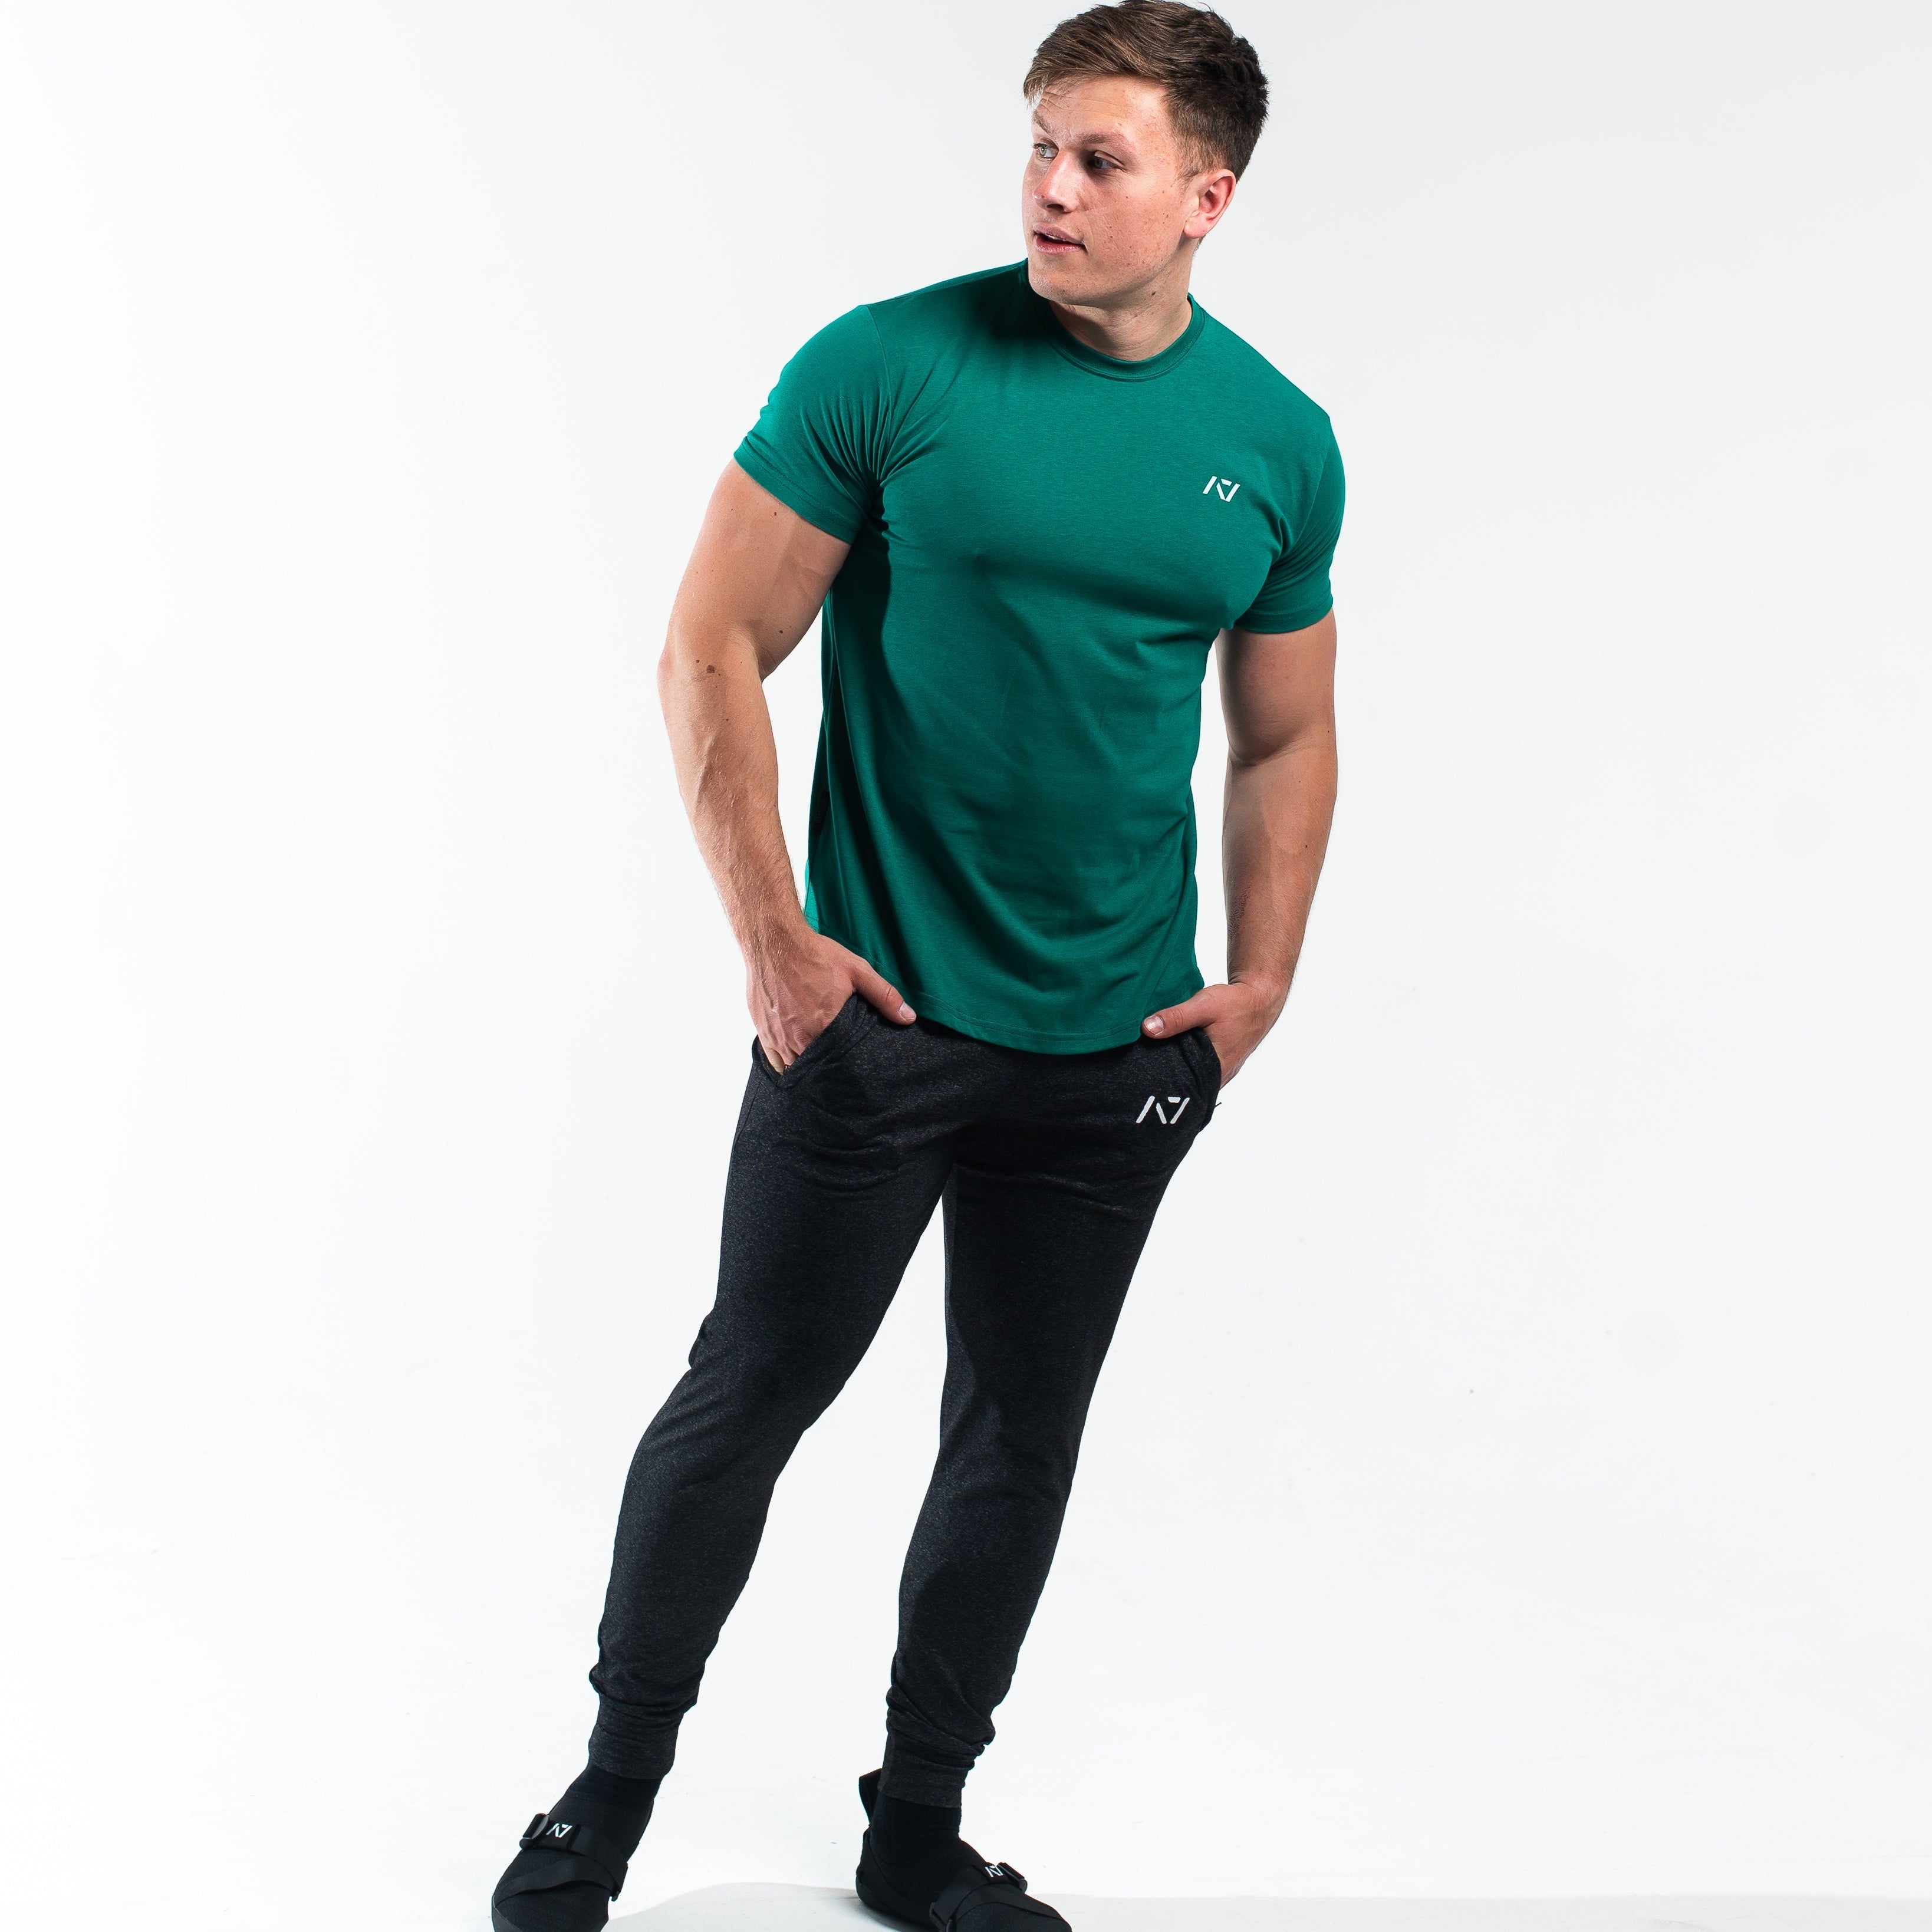 The Balance Collection combines comfort and aesthetics. The pieces in this collection are made with comfortable fabrics and minimal logos to create a simple, yet impactful look. Genouillères powerlifting shipping to France, Spain, Ireland, Germany, Italy, Sweden and EU.